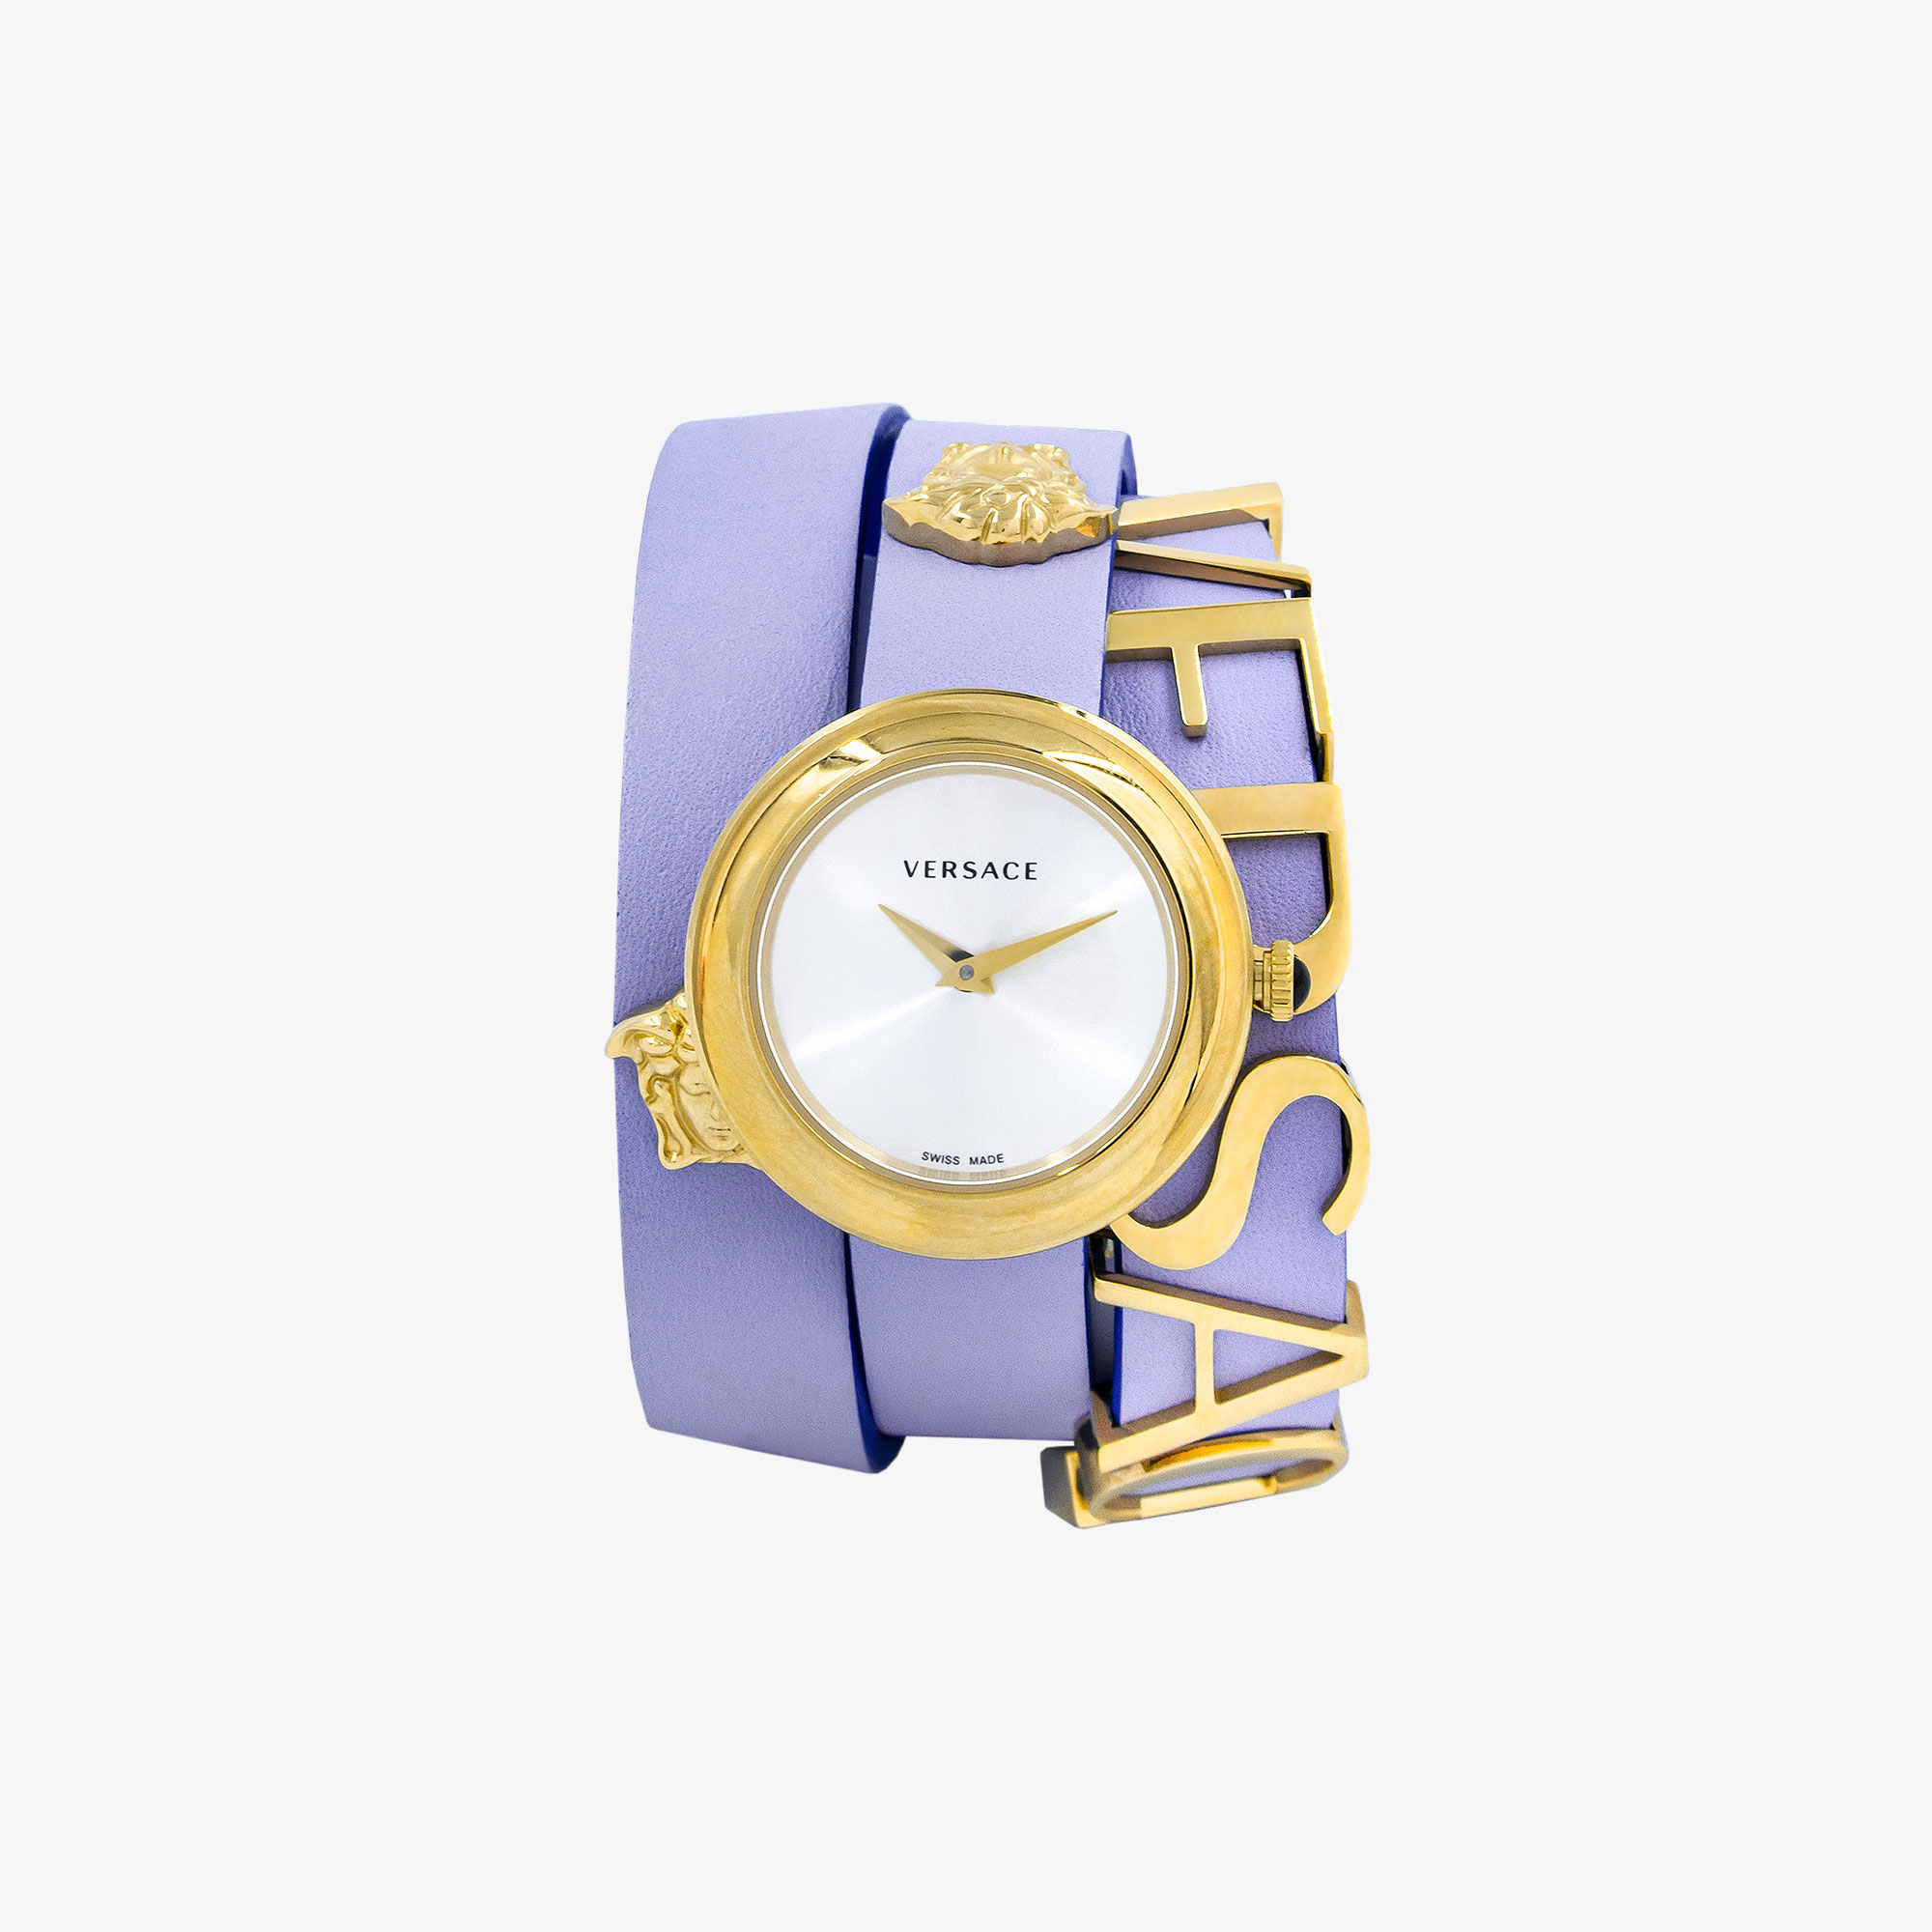 VERSACE V-FLARE WATCH WITH PURPLE LEATHER STRAP